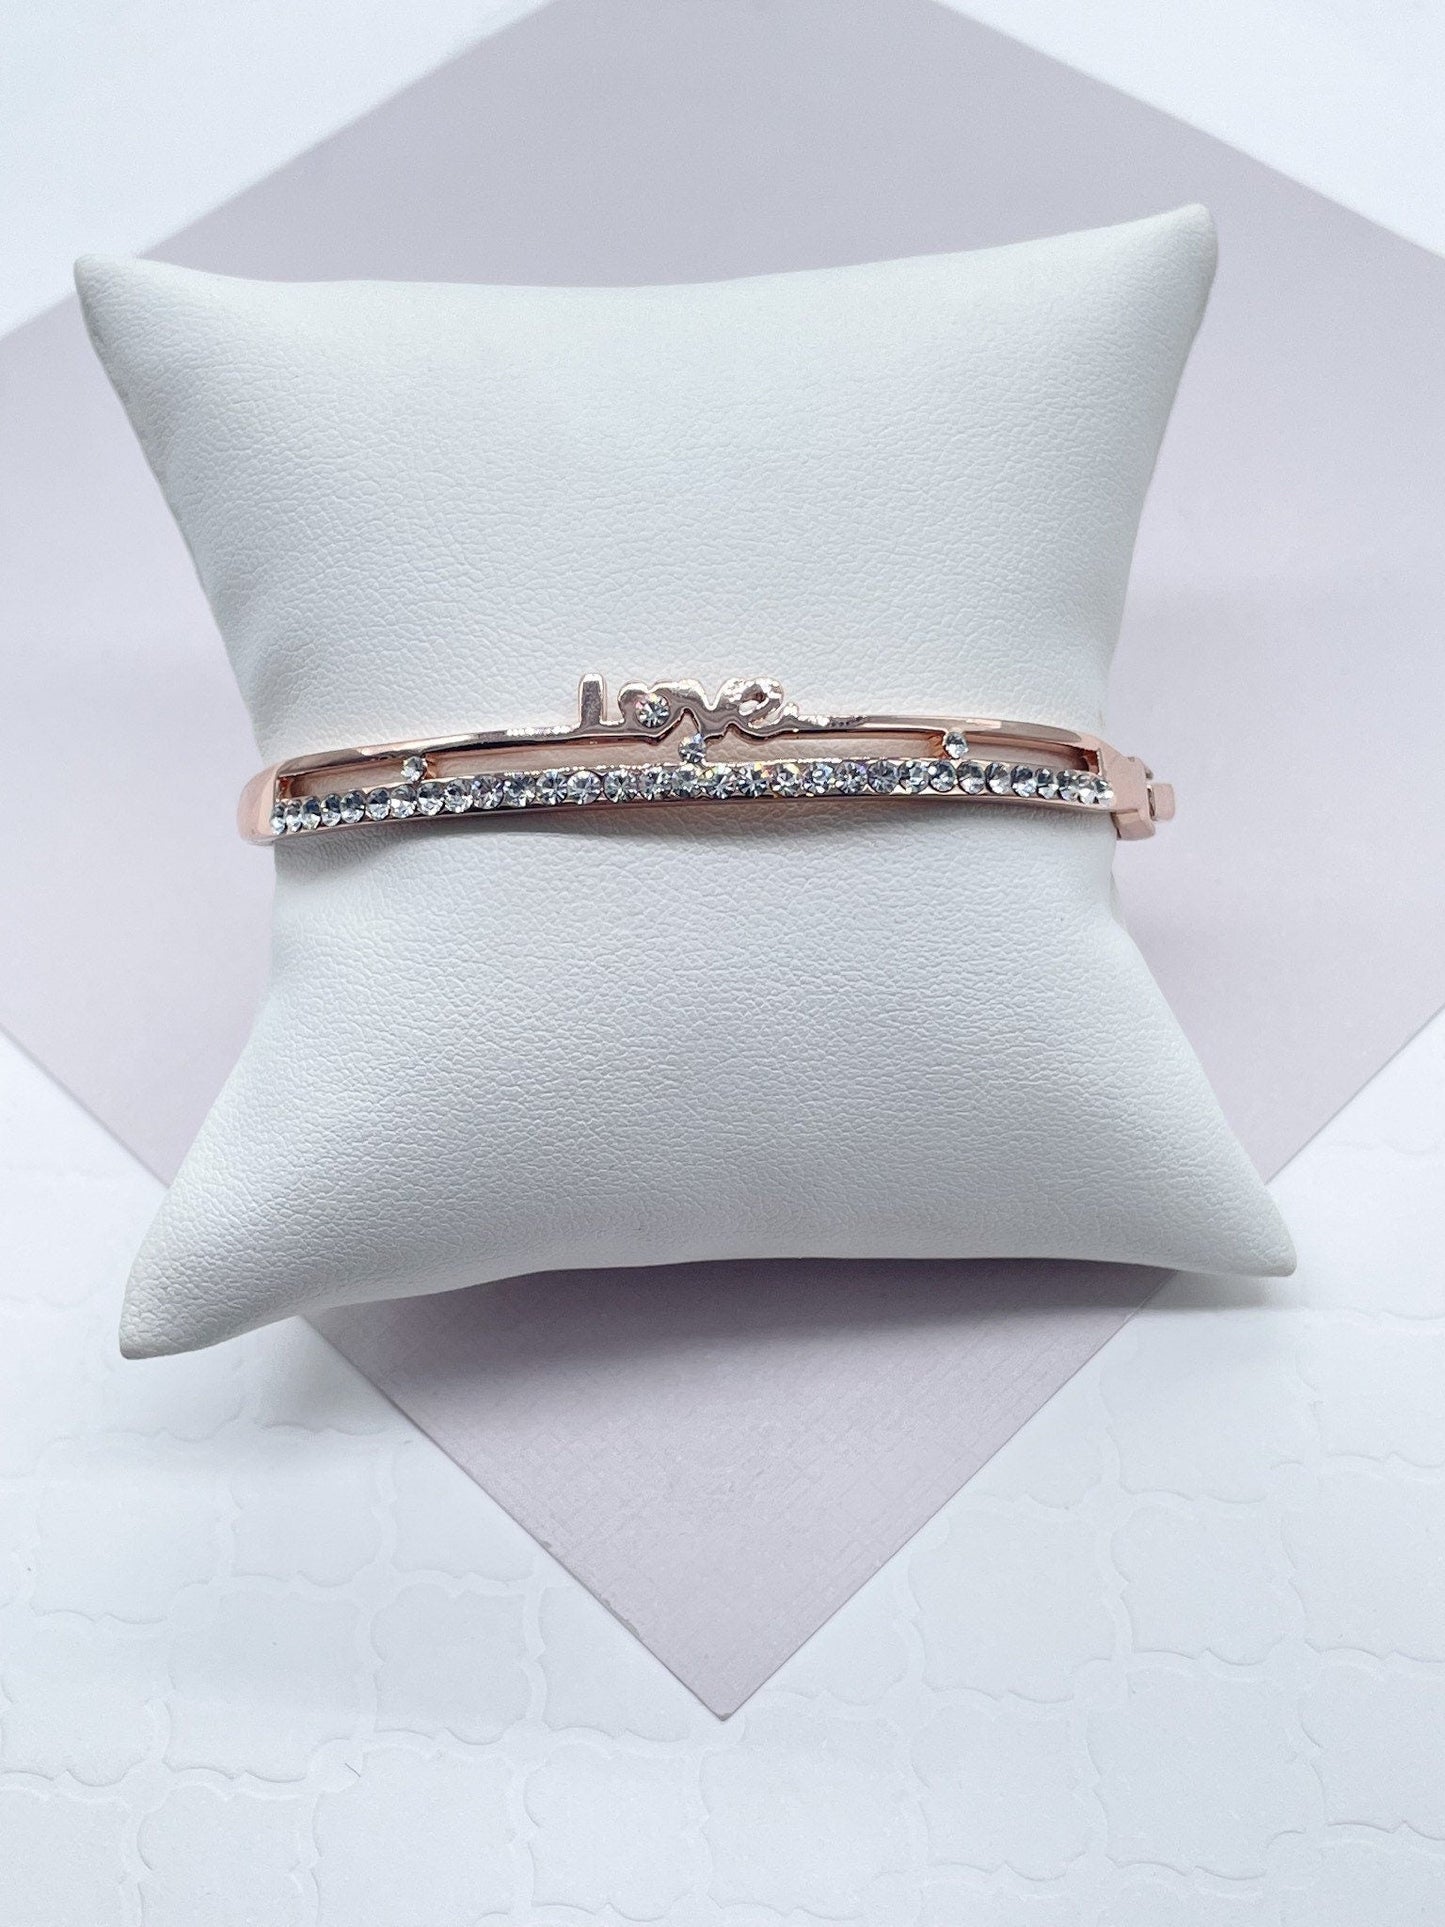 18k Gold Layered Cubic Zirconia Love Bangle Bracelet in Gold, Silver or Rose Gold